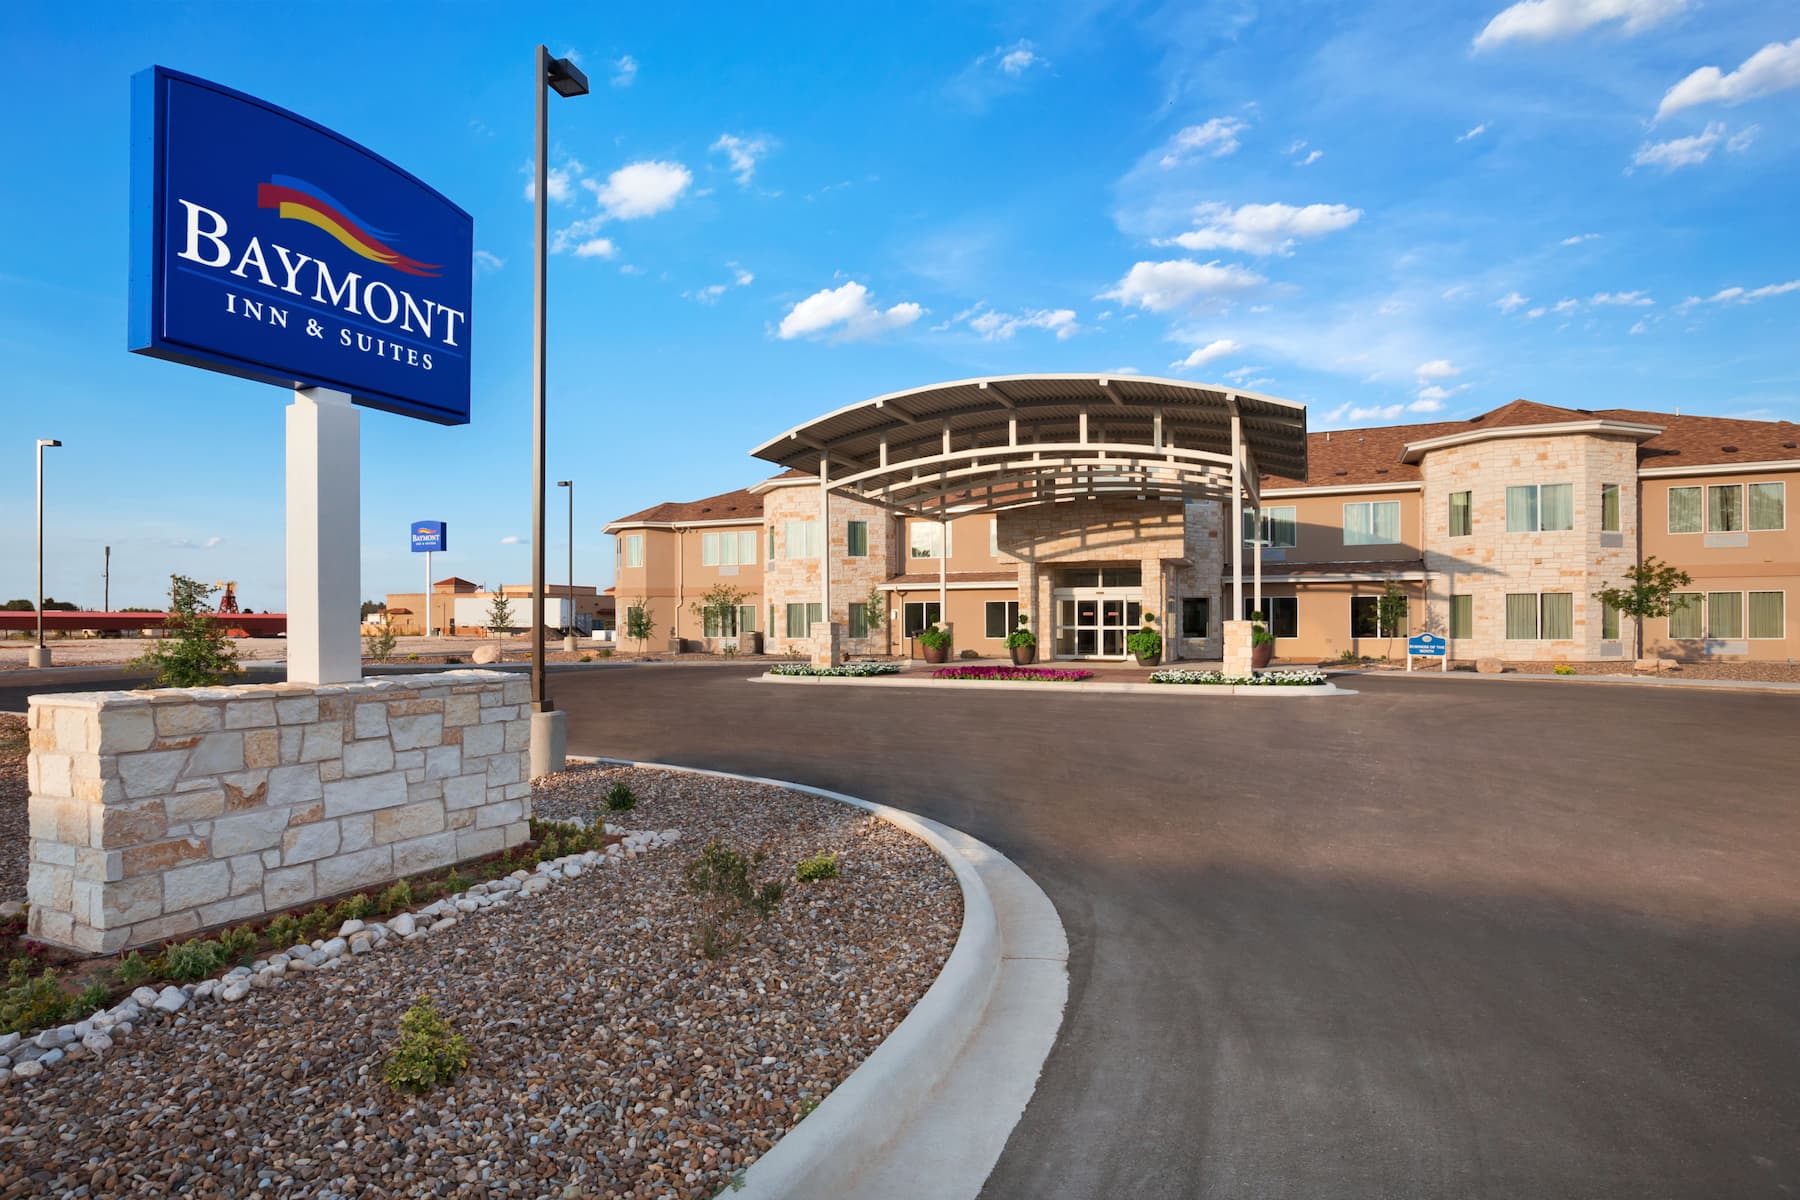 Exterior of Baymont by Wyndham Hobbs hotel in Hobbs, New Mexico.